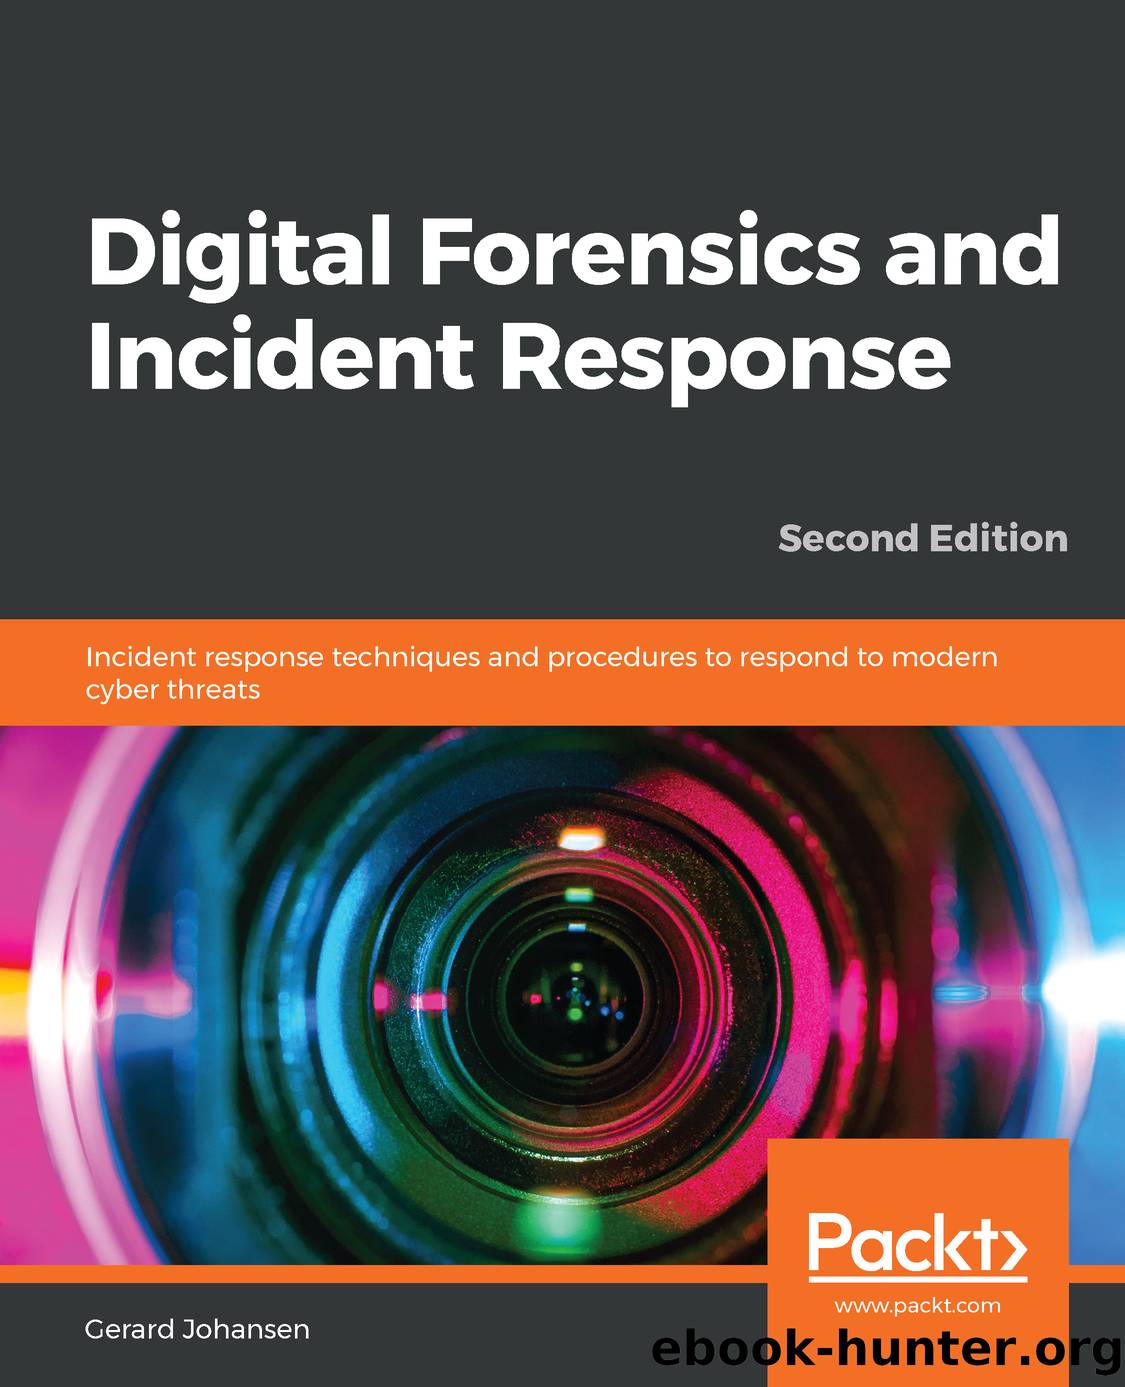 Digital Forensics and Incident Response - Second Edition by Gerard Johansen